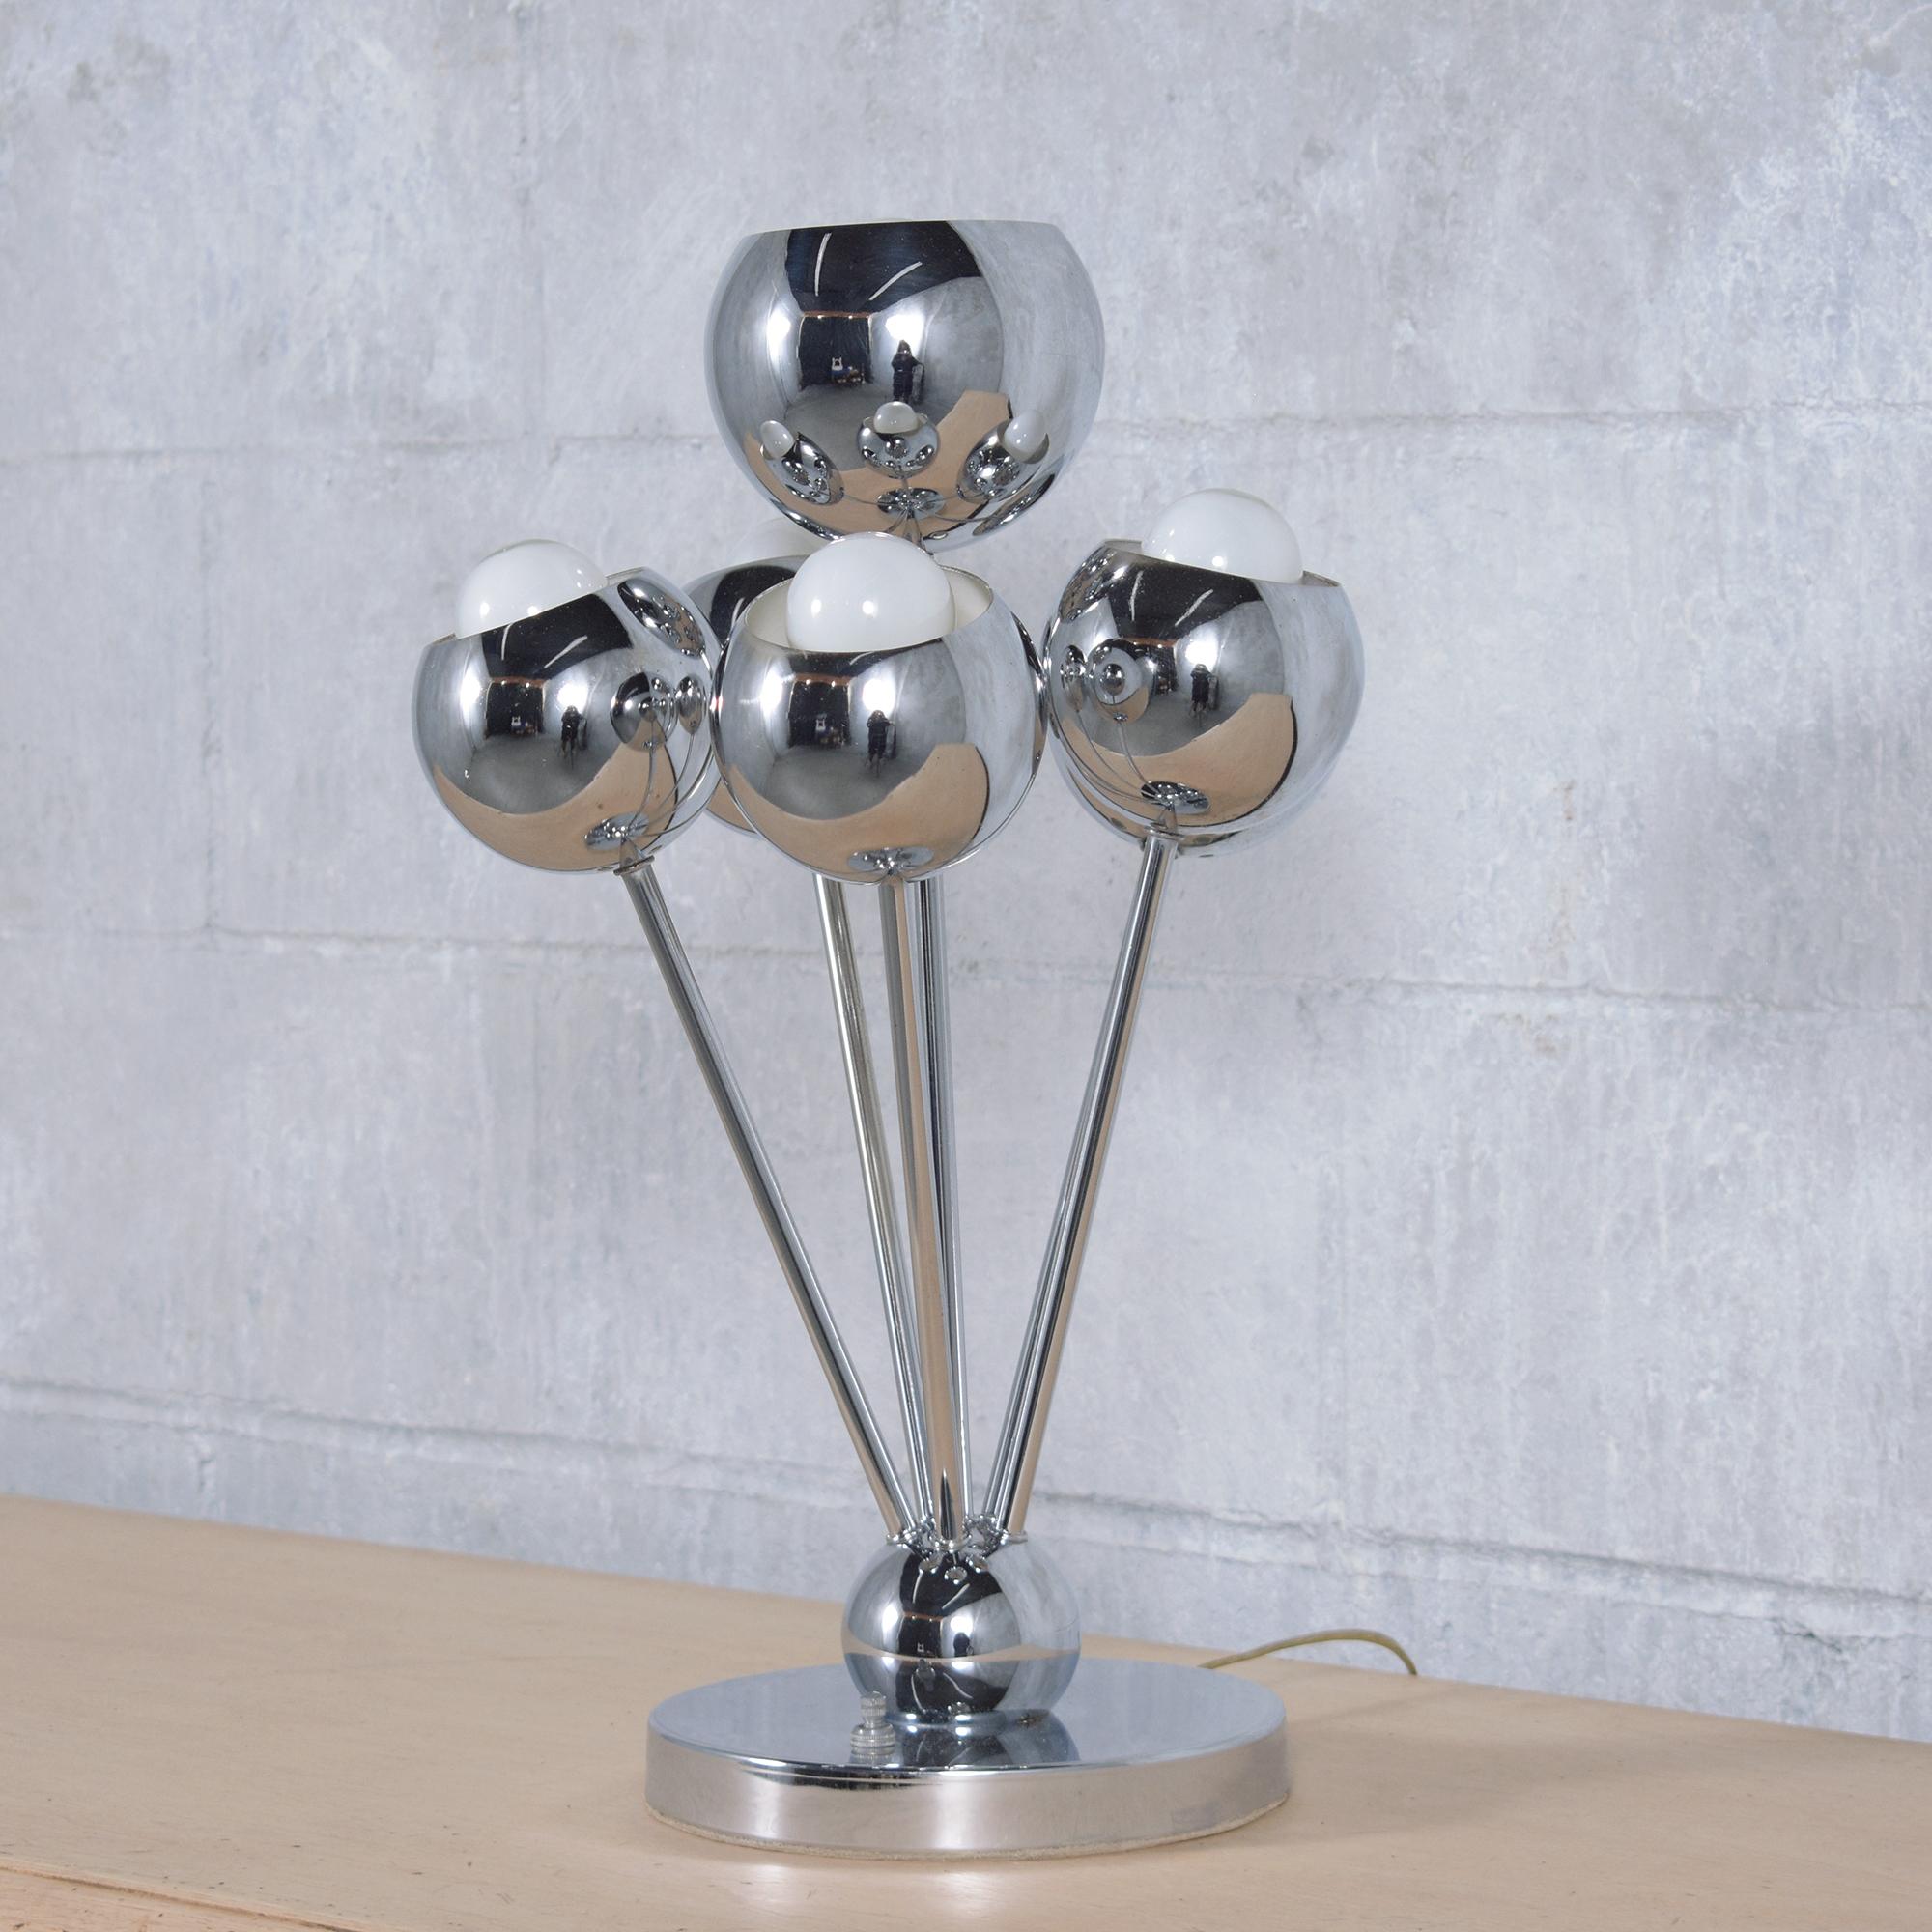 Immerse yourself in the iconic style of the 1960s with our mid-century modern table lamp, a perfect emblem of the era's space-age and atomic design influences. Crafted from steel and finished in sleek chrome, this lamp has been meticulously restored